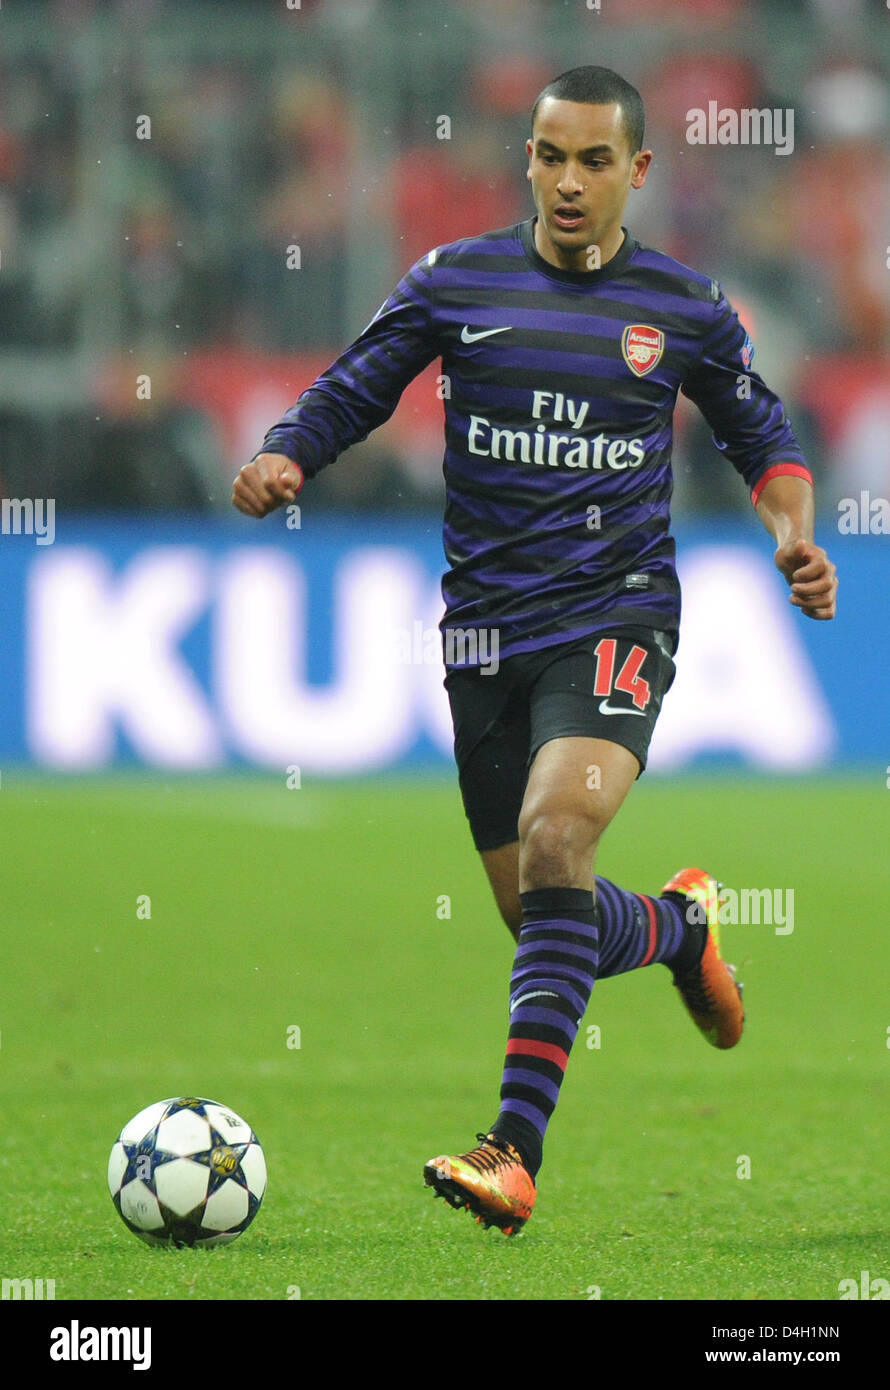 Munich, Germany. 13th March 2013. Arsenal's Theo Walcott in action during the UEFA Champions League soccer round of sixteen between FC Bayern Munich and Arsenal FC at Fußball Arena München in Munich, Germany, 13 2012. Photo: Marc Müller dpa /Alamy Live News Stock Photo